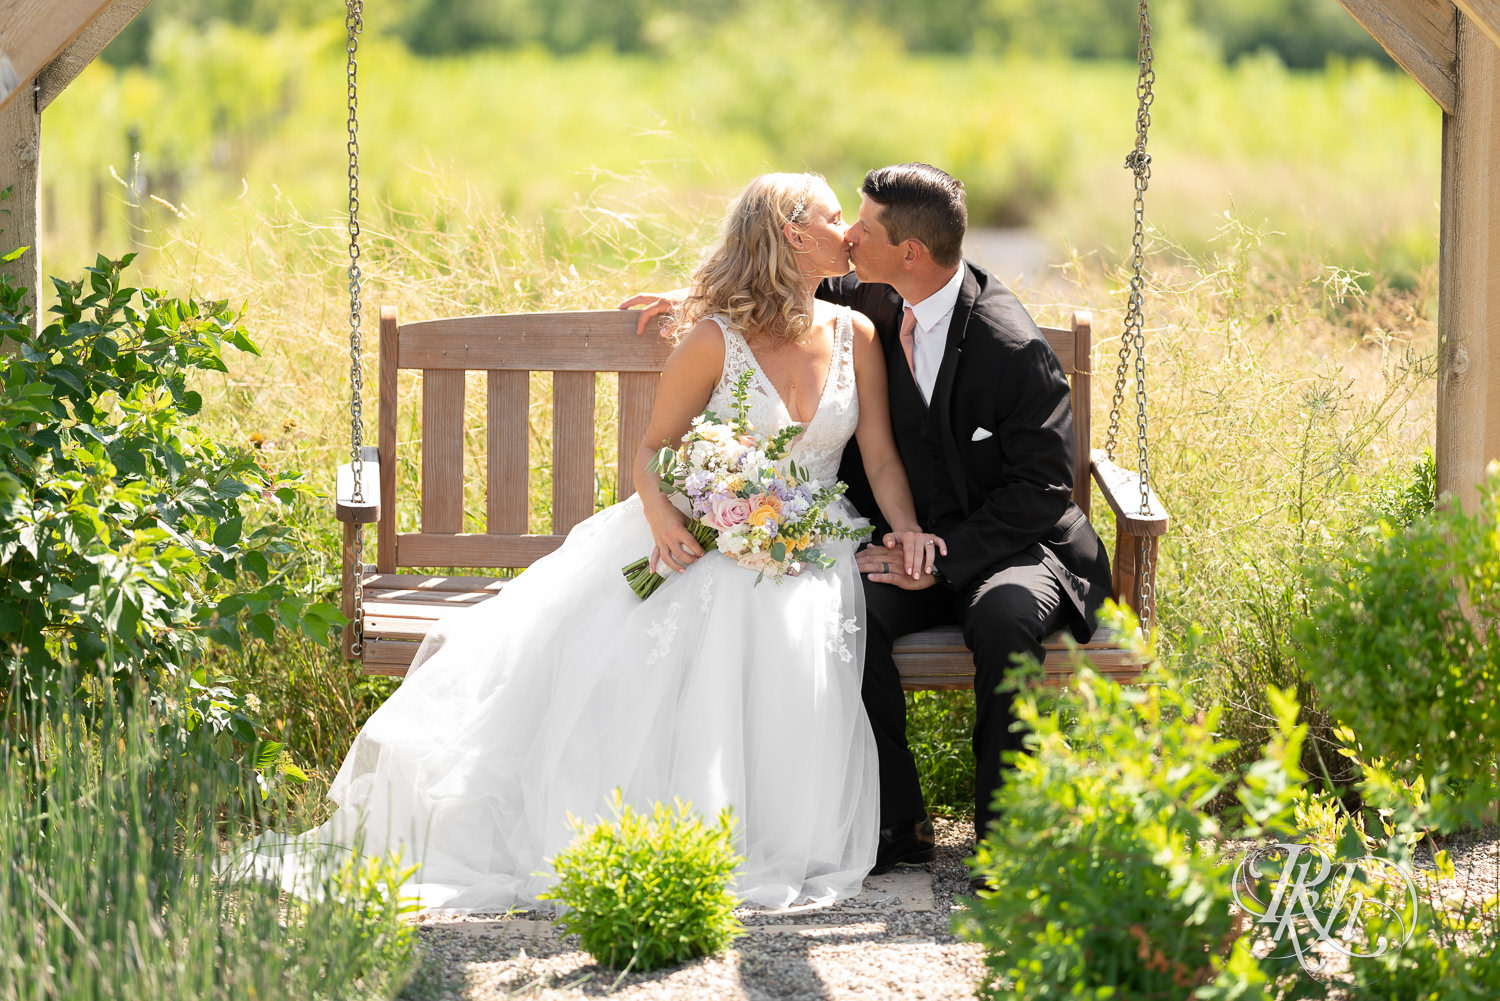 Bride and groom kiss on swing at The Outpost Center in Chaska, Minnesota.